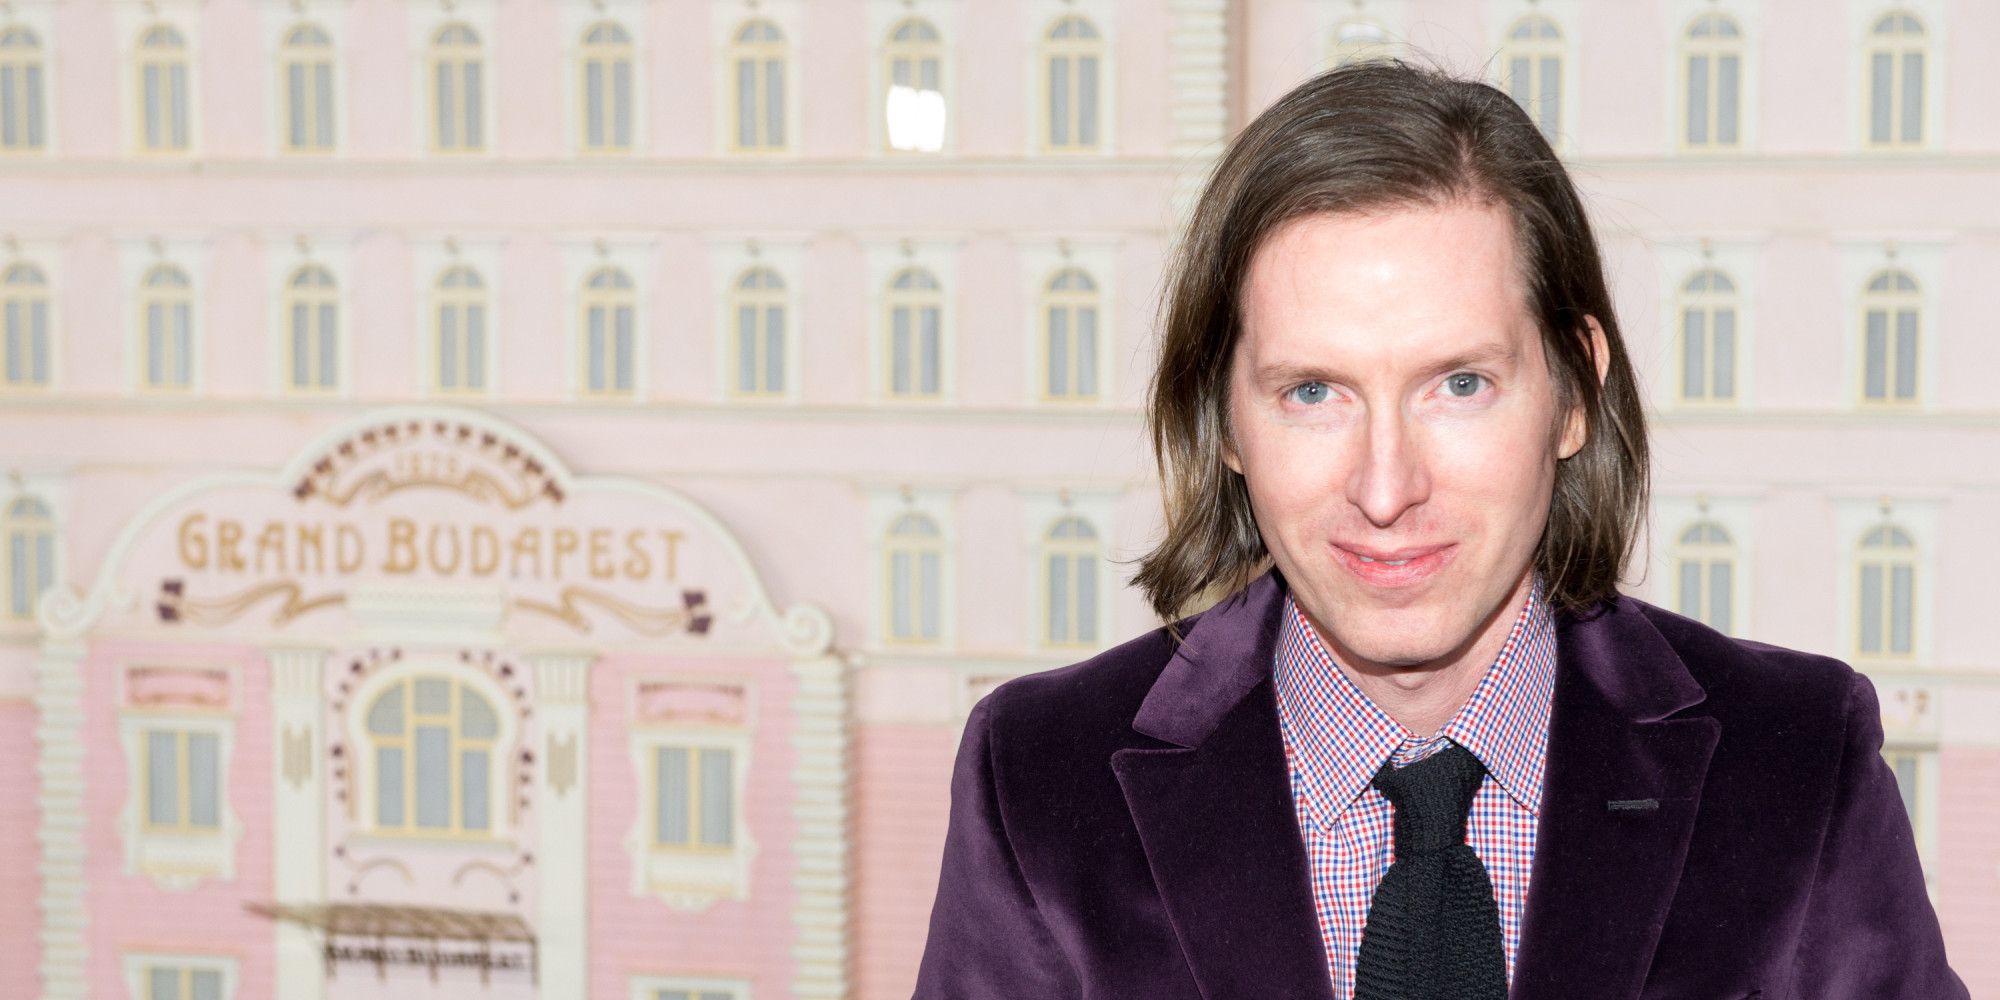 NEW YORK, NY - FEBRUARY 26: Director Wes Anderson attends "The Grand Budapest Hotel" premiere at Alice Tully Hall on February 26, 2014 in New York City. (Photo by Mike Pont/FilmMagic)